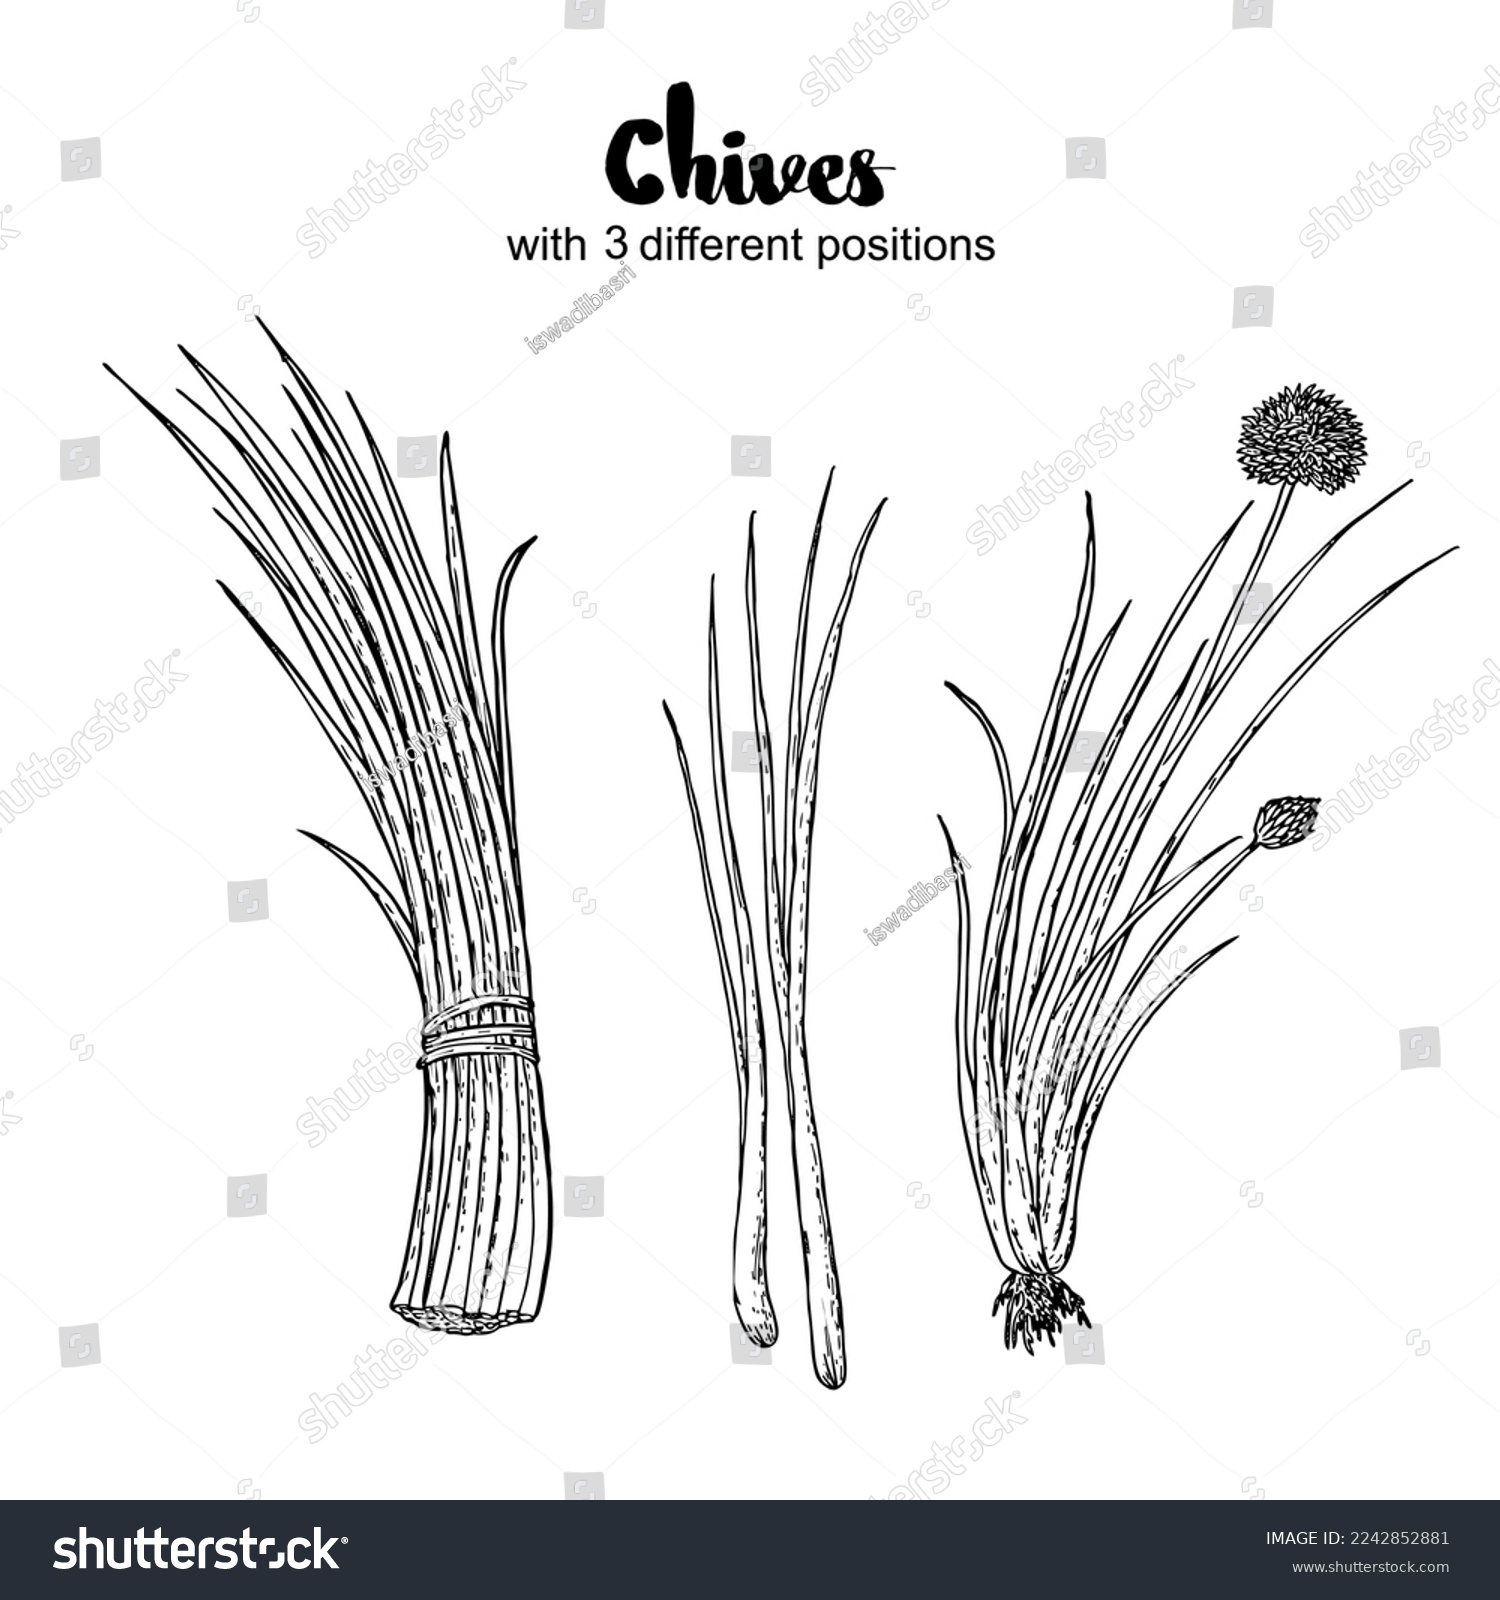 SVG of Chives vector, drawing, engraving, ink, line art, vector. Illustration of Hand Drawn Sketch Flowering Garlic Chives or Allium Tuberosum Isolated on White Background svg